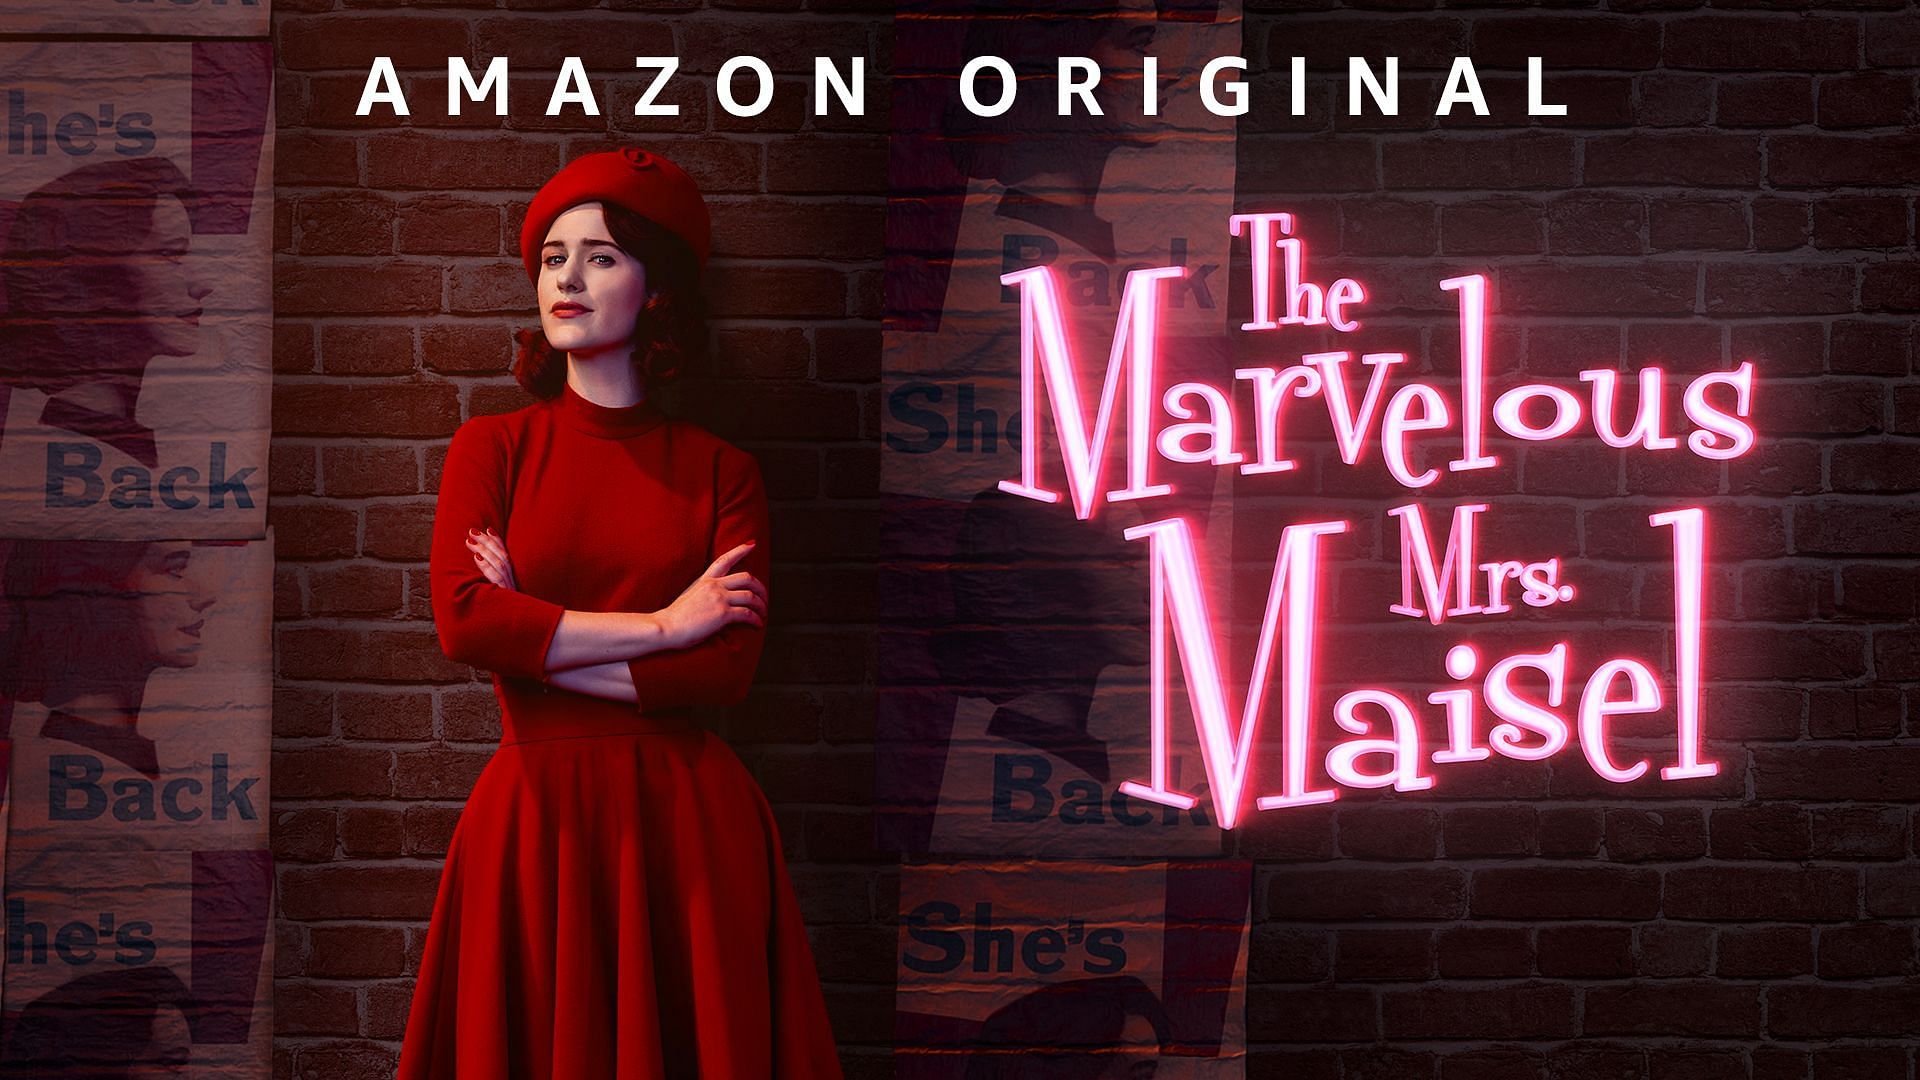 Season 5 of The Marvelous Mrs. Maisel will be the show